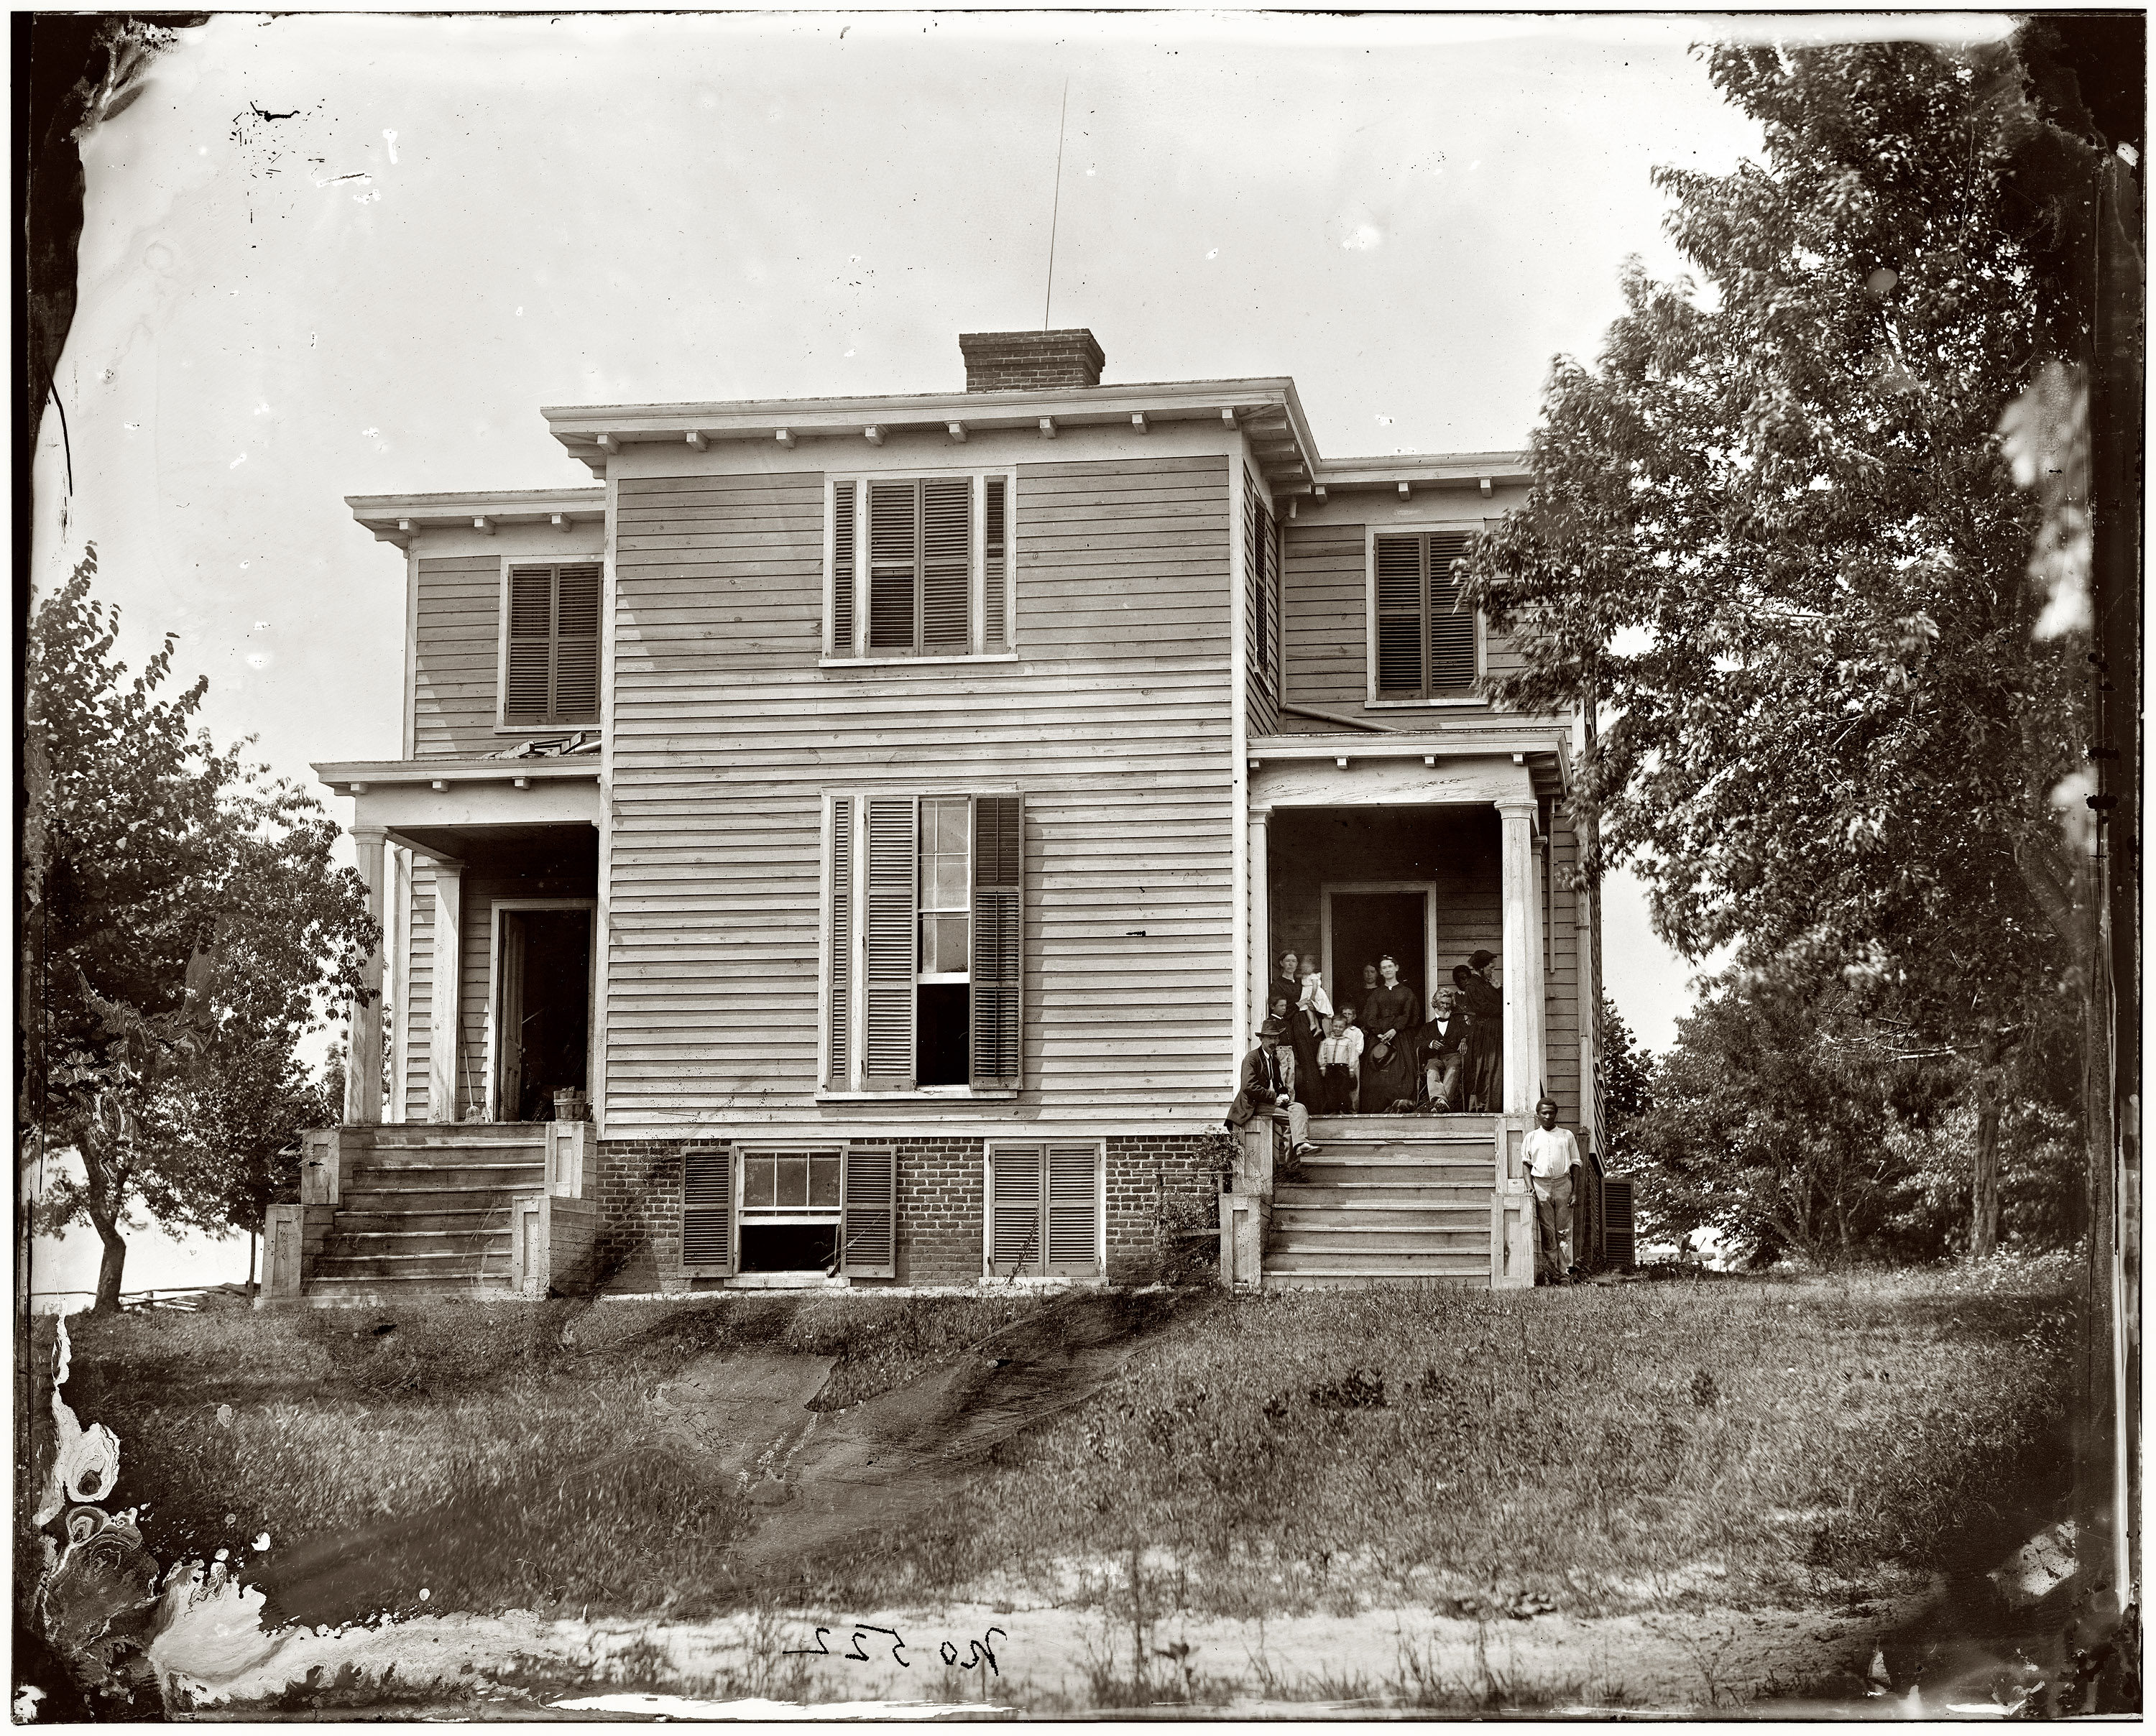 May 1865. The Bryant house near Petersburg, Virginia. View full size. Wet collodion glass-plate negative by Timothy H. O'Sullivan.